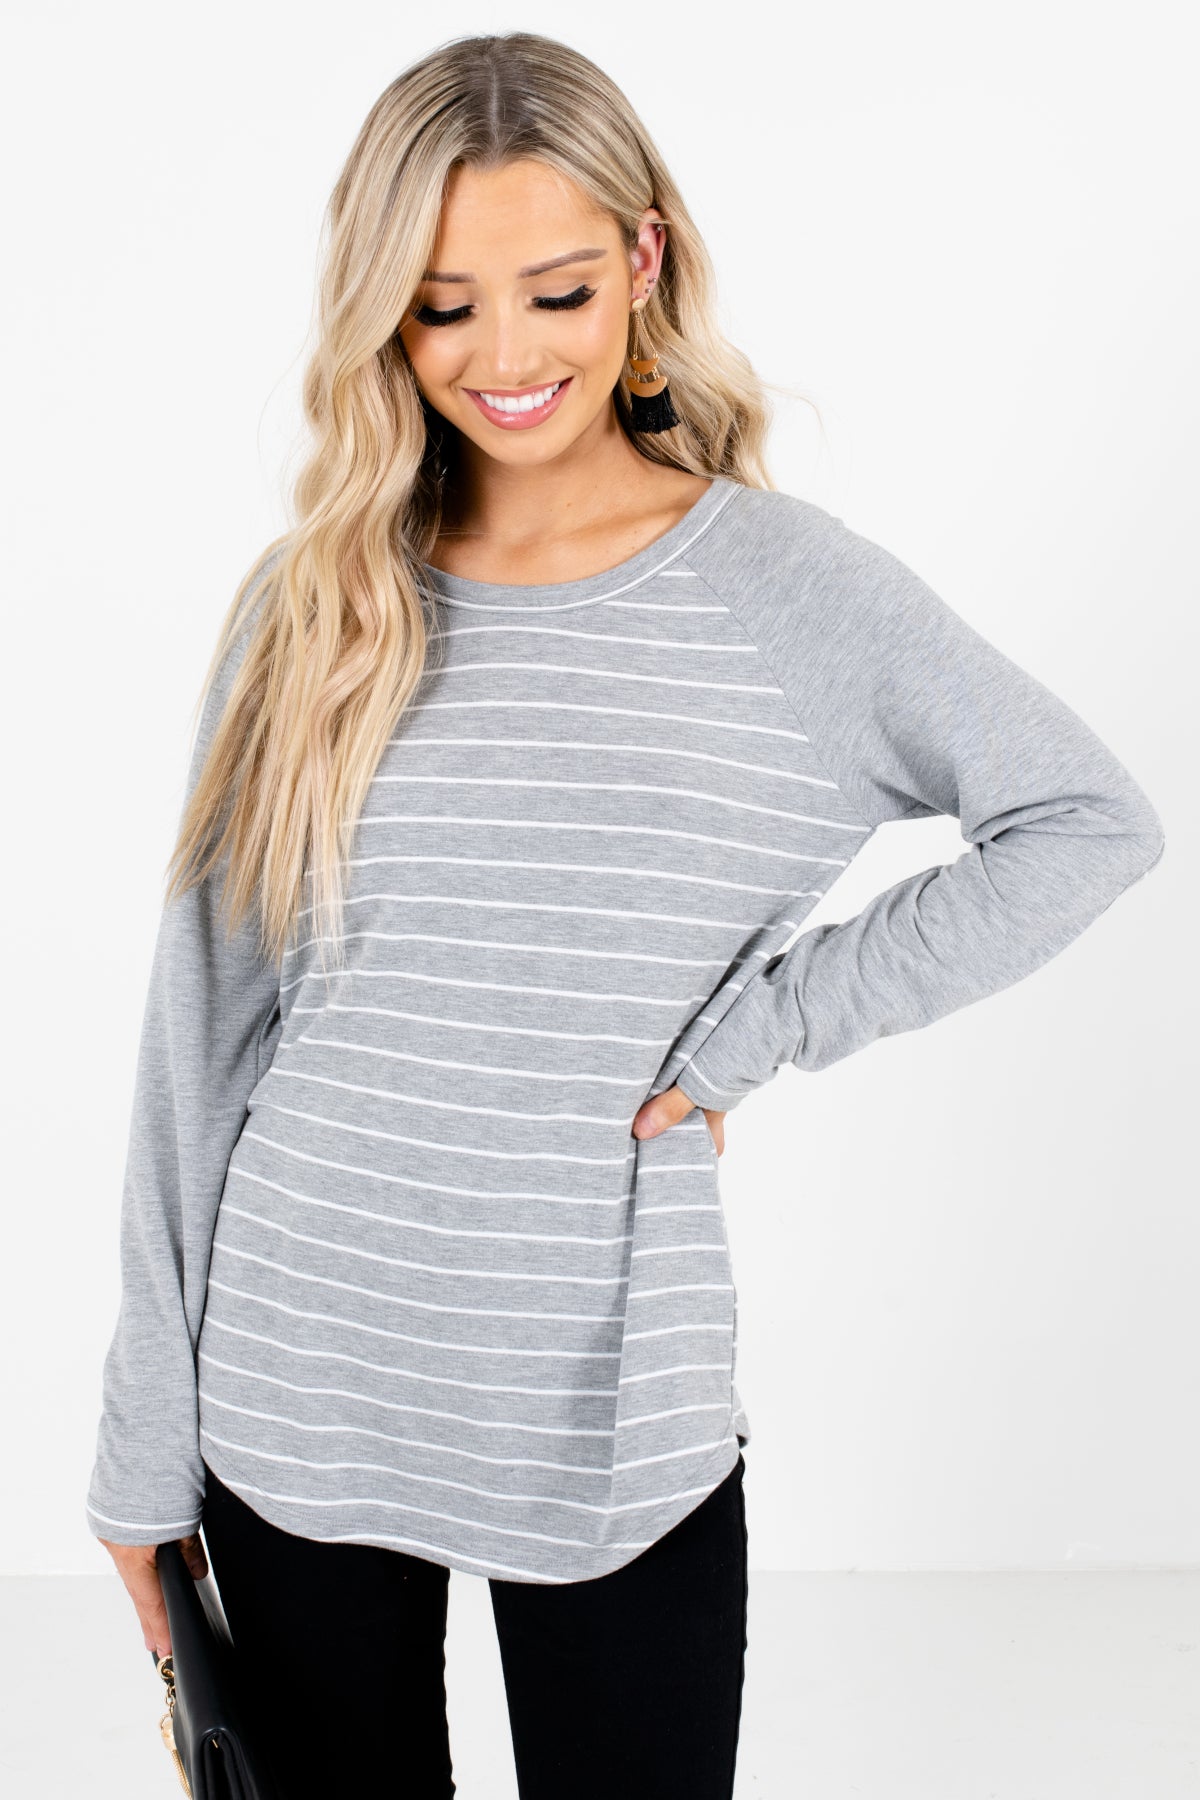 Gray and White Striped Boutique Tops for Women